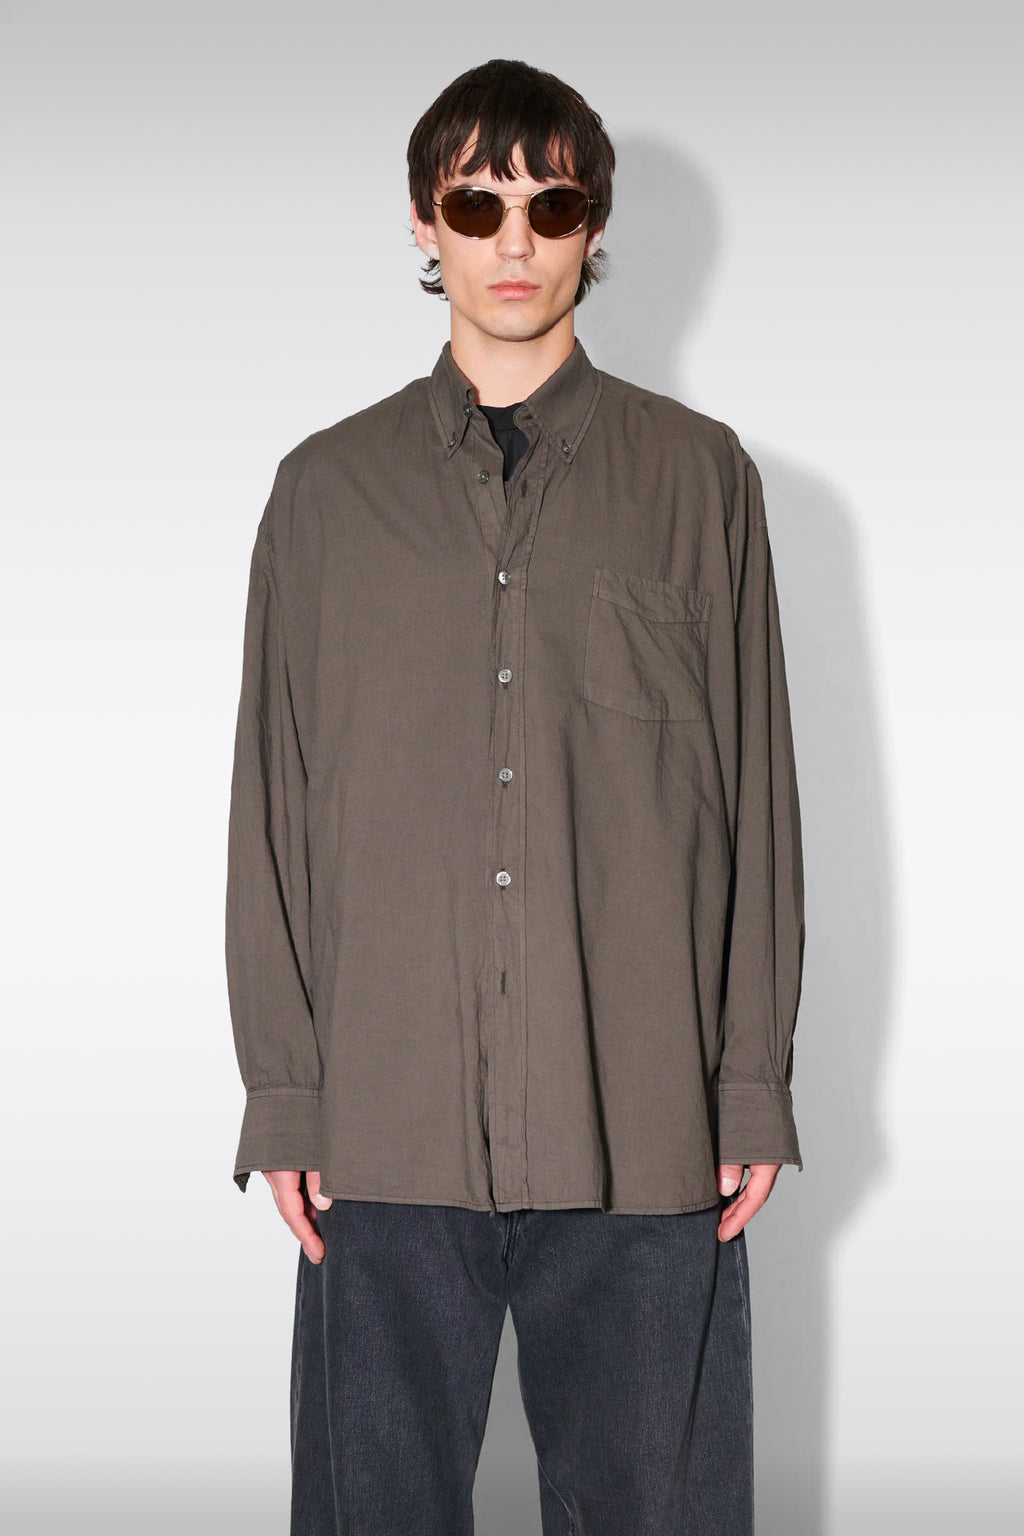 alt-image__Faded-brown-lightweight-cotton-shirt-with-long-sleeves---Borrowed-BD-Shirt